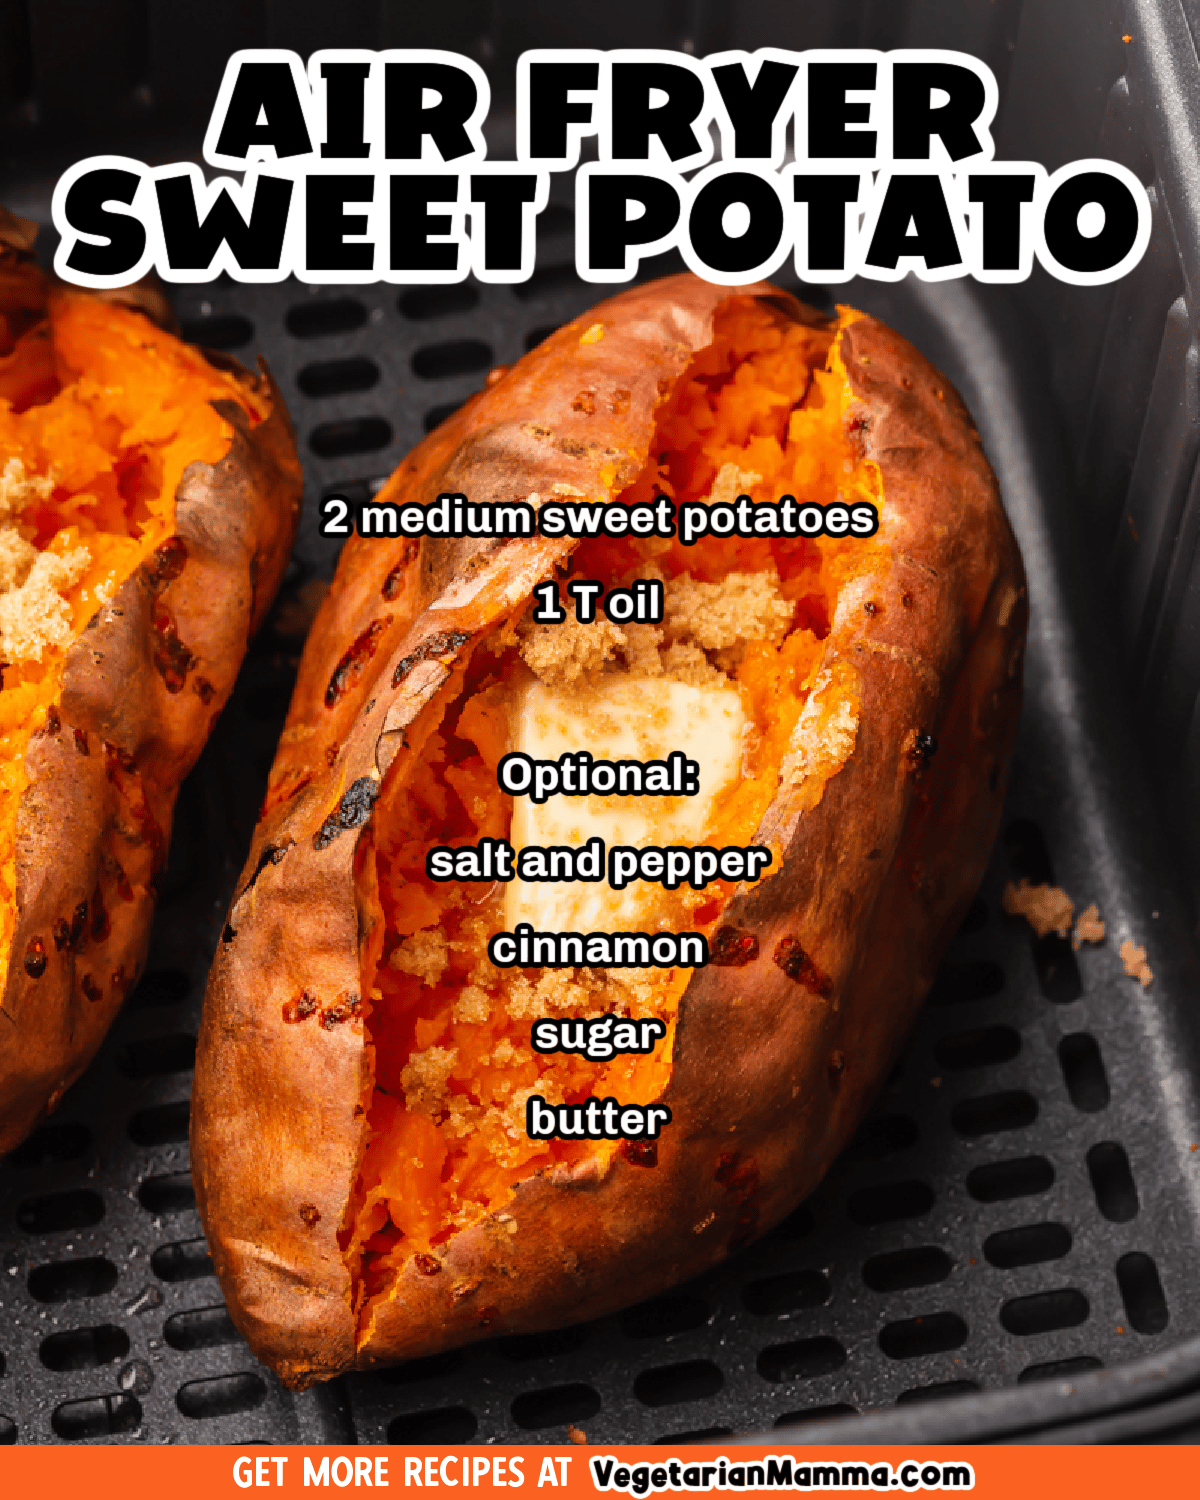 Air Fryer Baked Sweet Potato is a delicious side dish to compliment any meal. Just pop into the air fryer and they will be ready in no time. #airfryer #sweetpotato